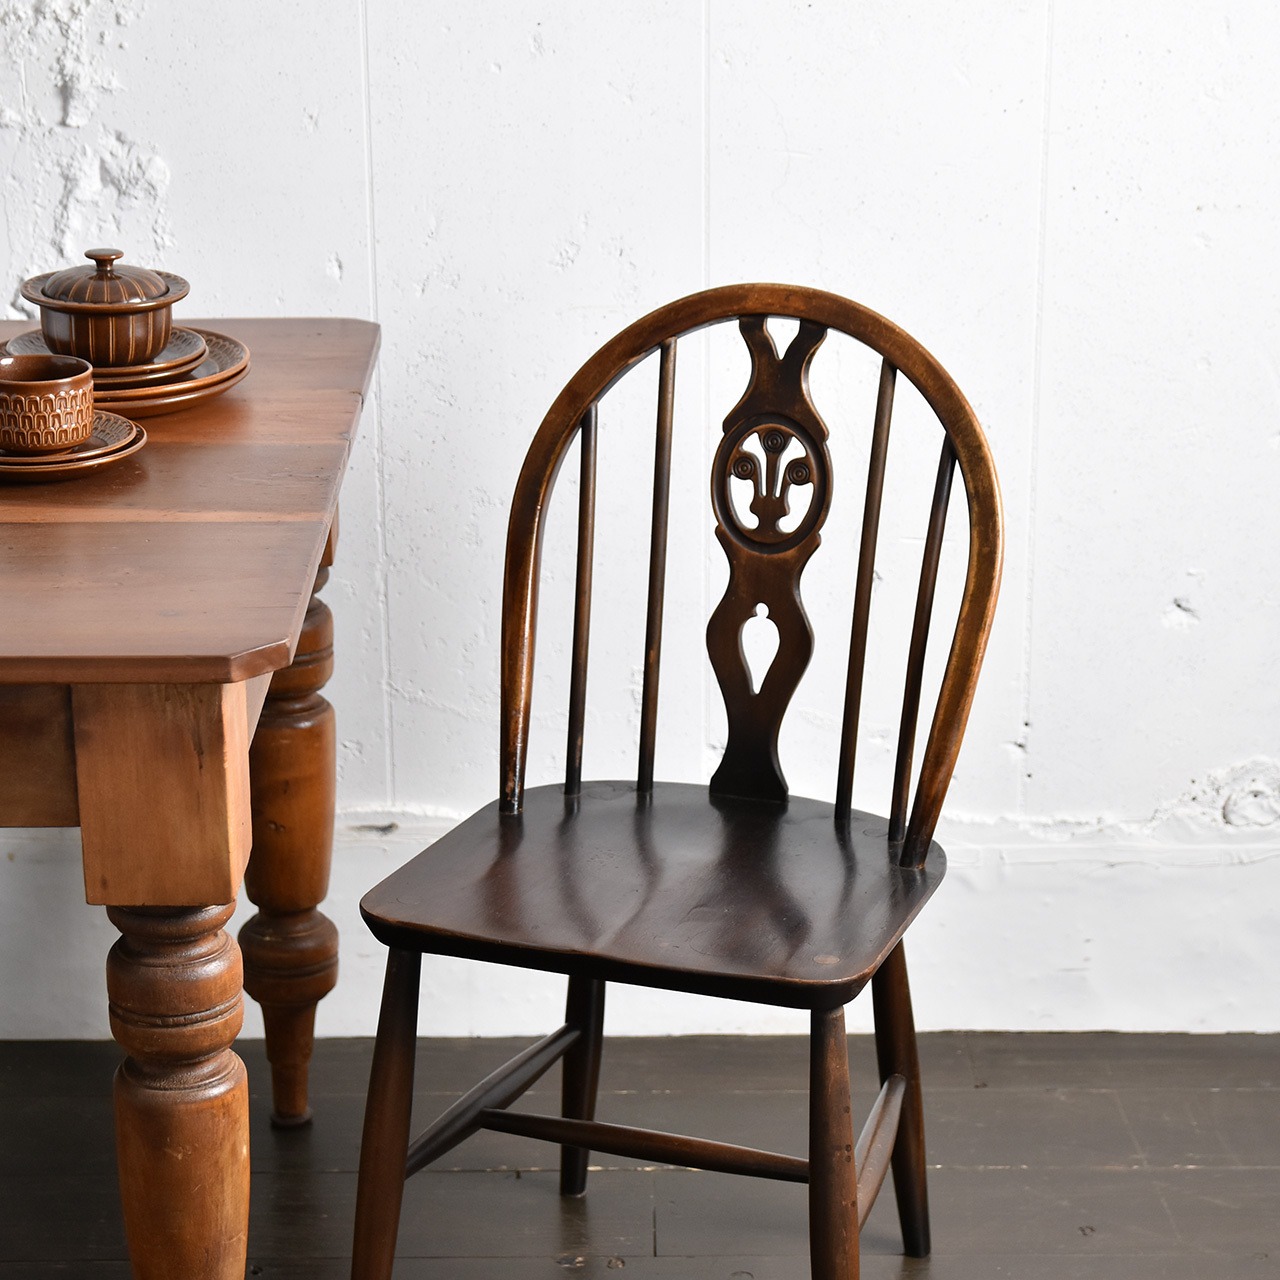 Ercol Thistle back Chair / アーコール シスルバック チェア / 2010BNS-001